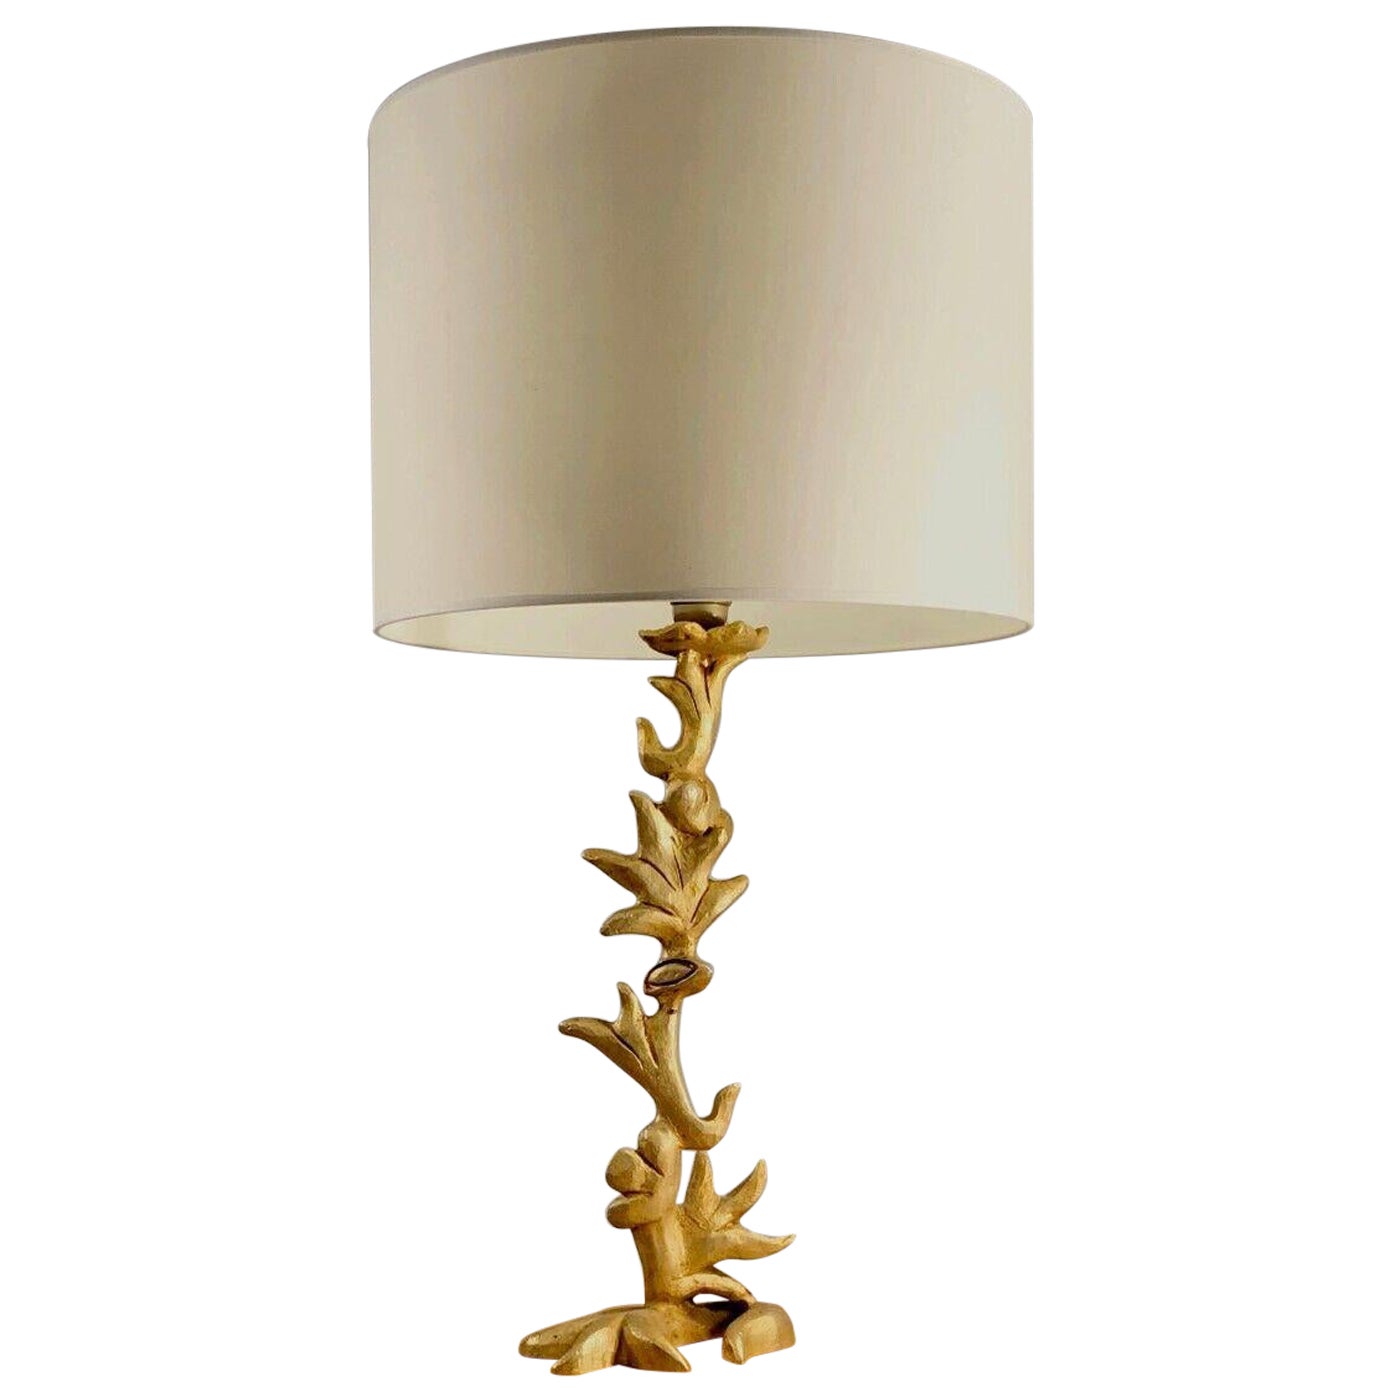 A POST-MODERN Sculptural TABLE LAMP by GEORGES MATHIAS, FONDICA, France 1980-90 For Sale